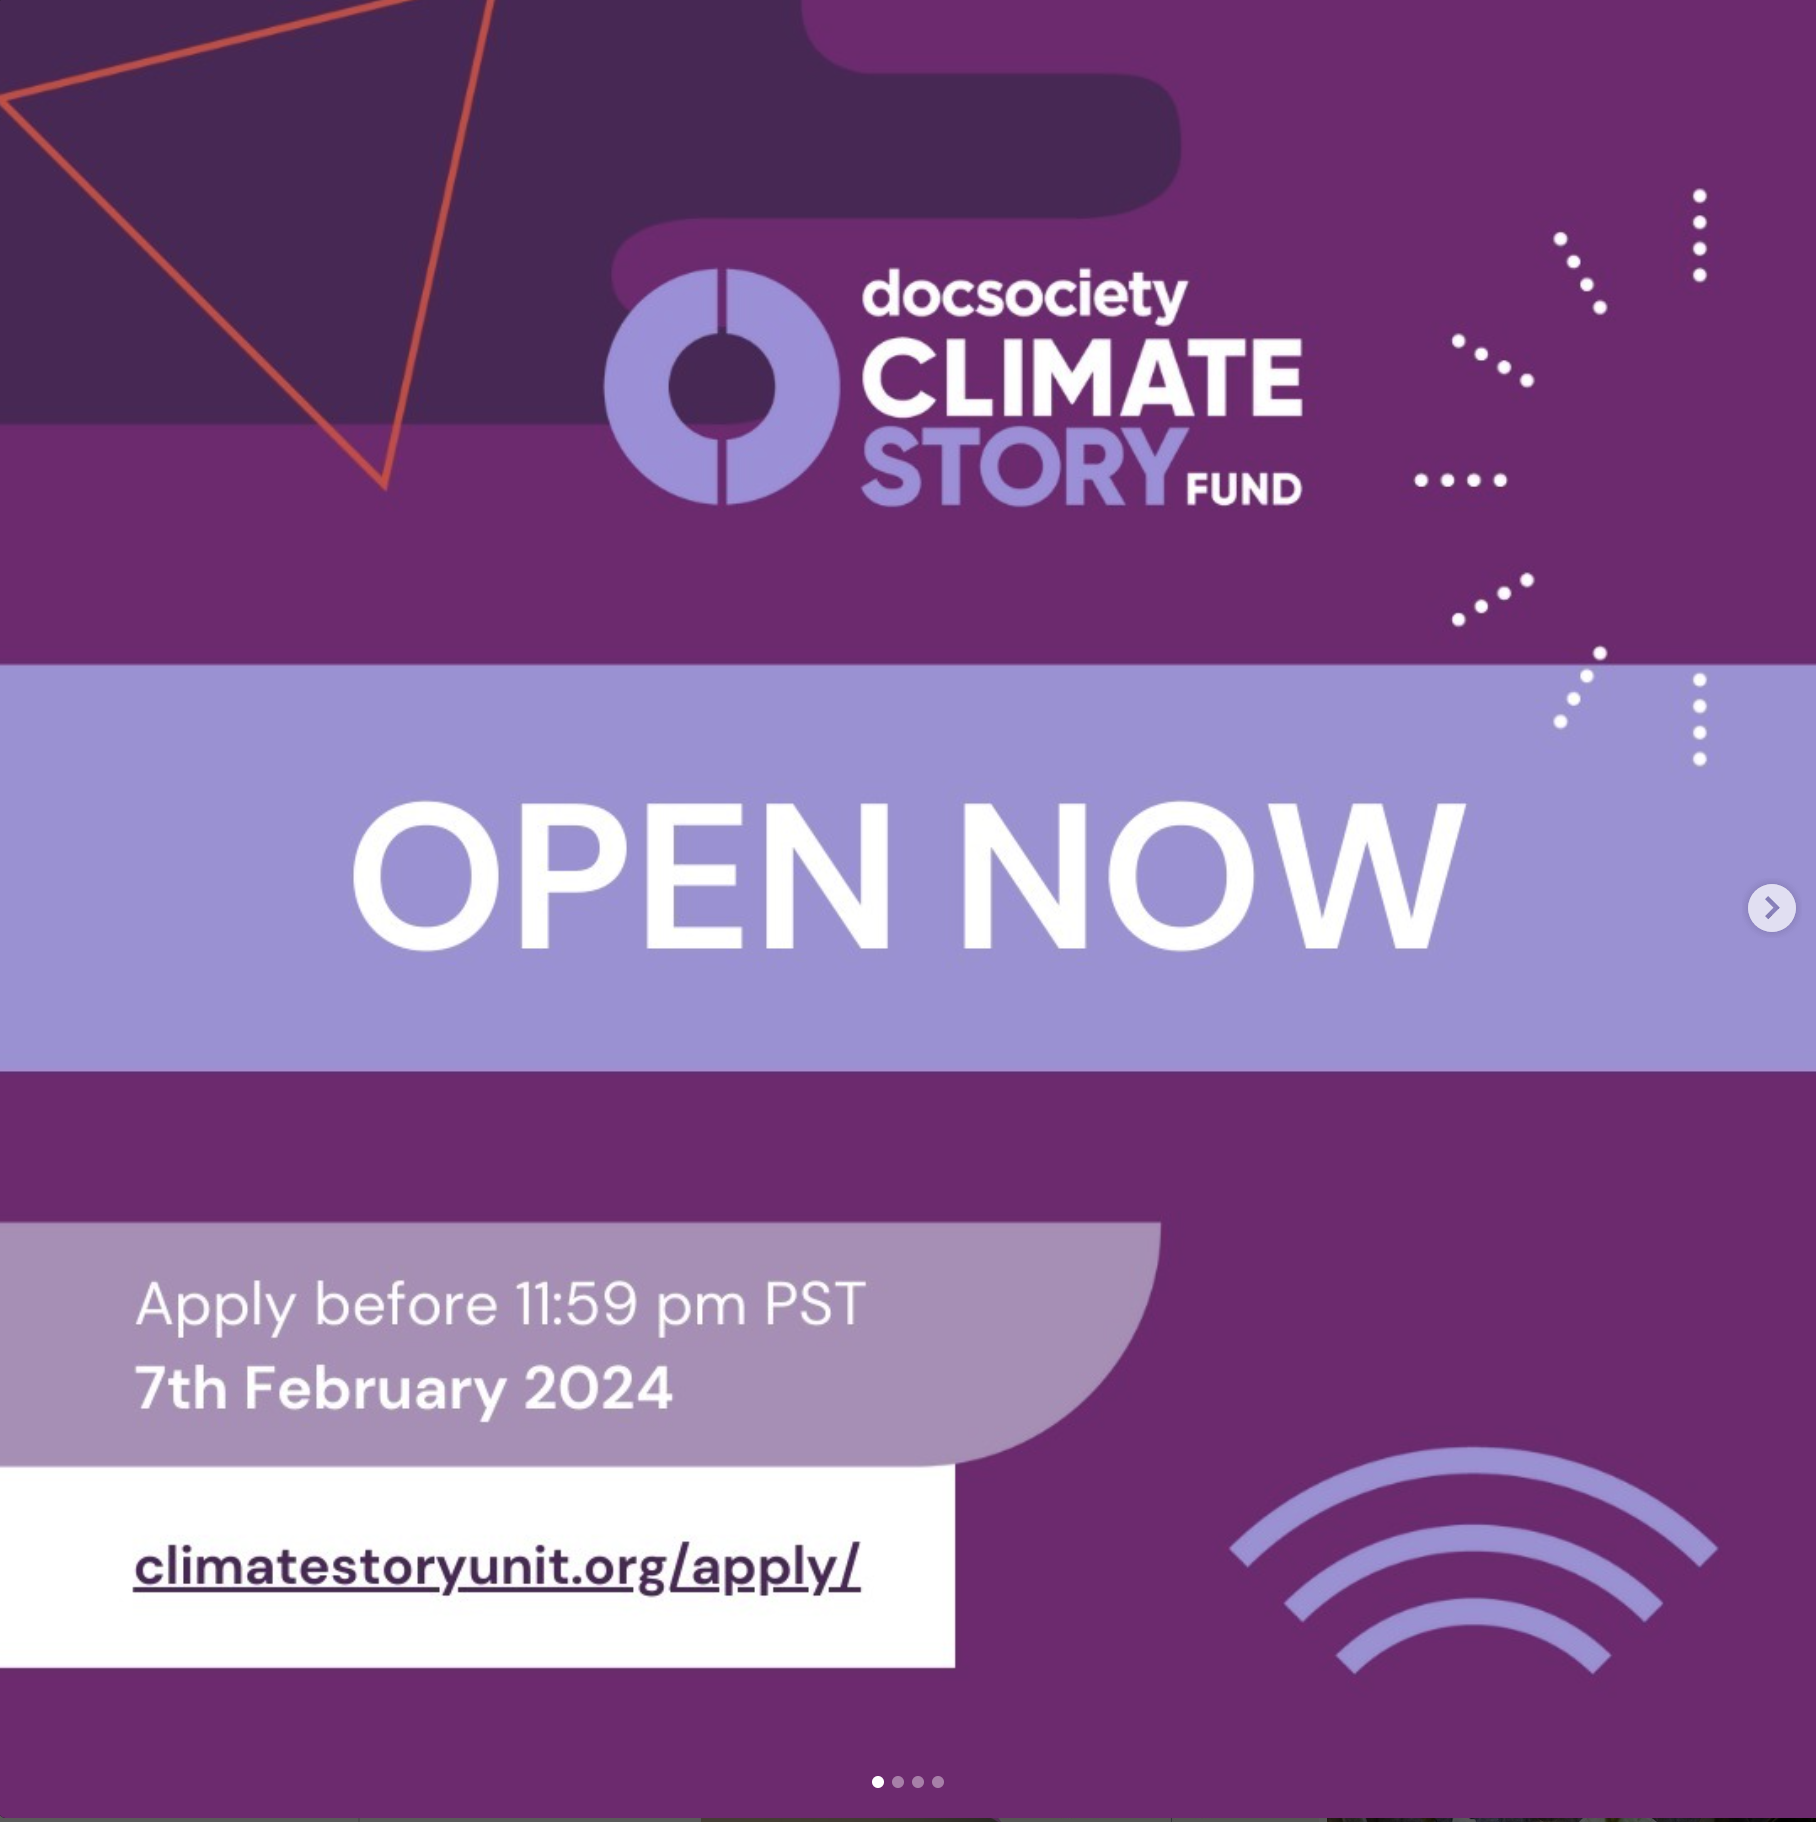 text on purple background: Open now page for climate story fund